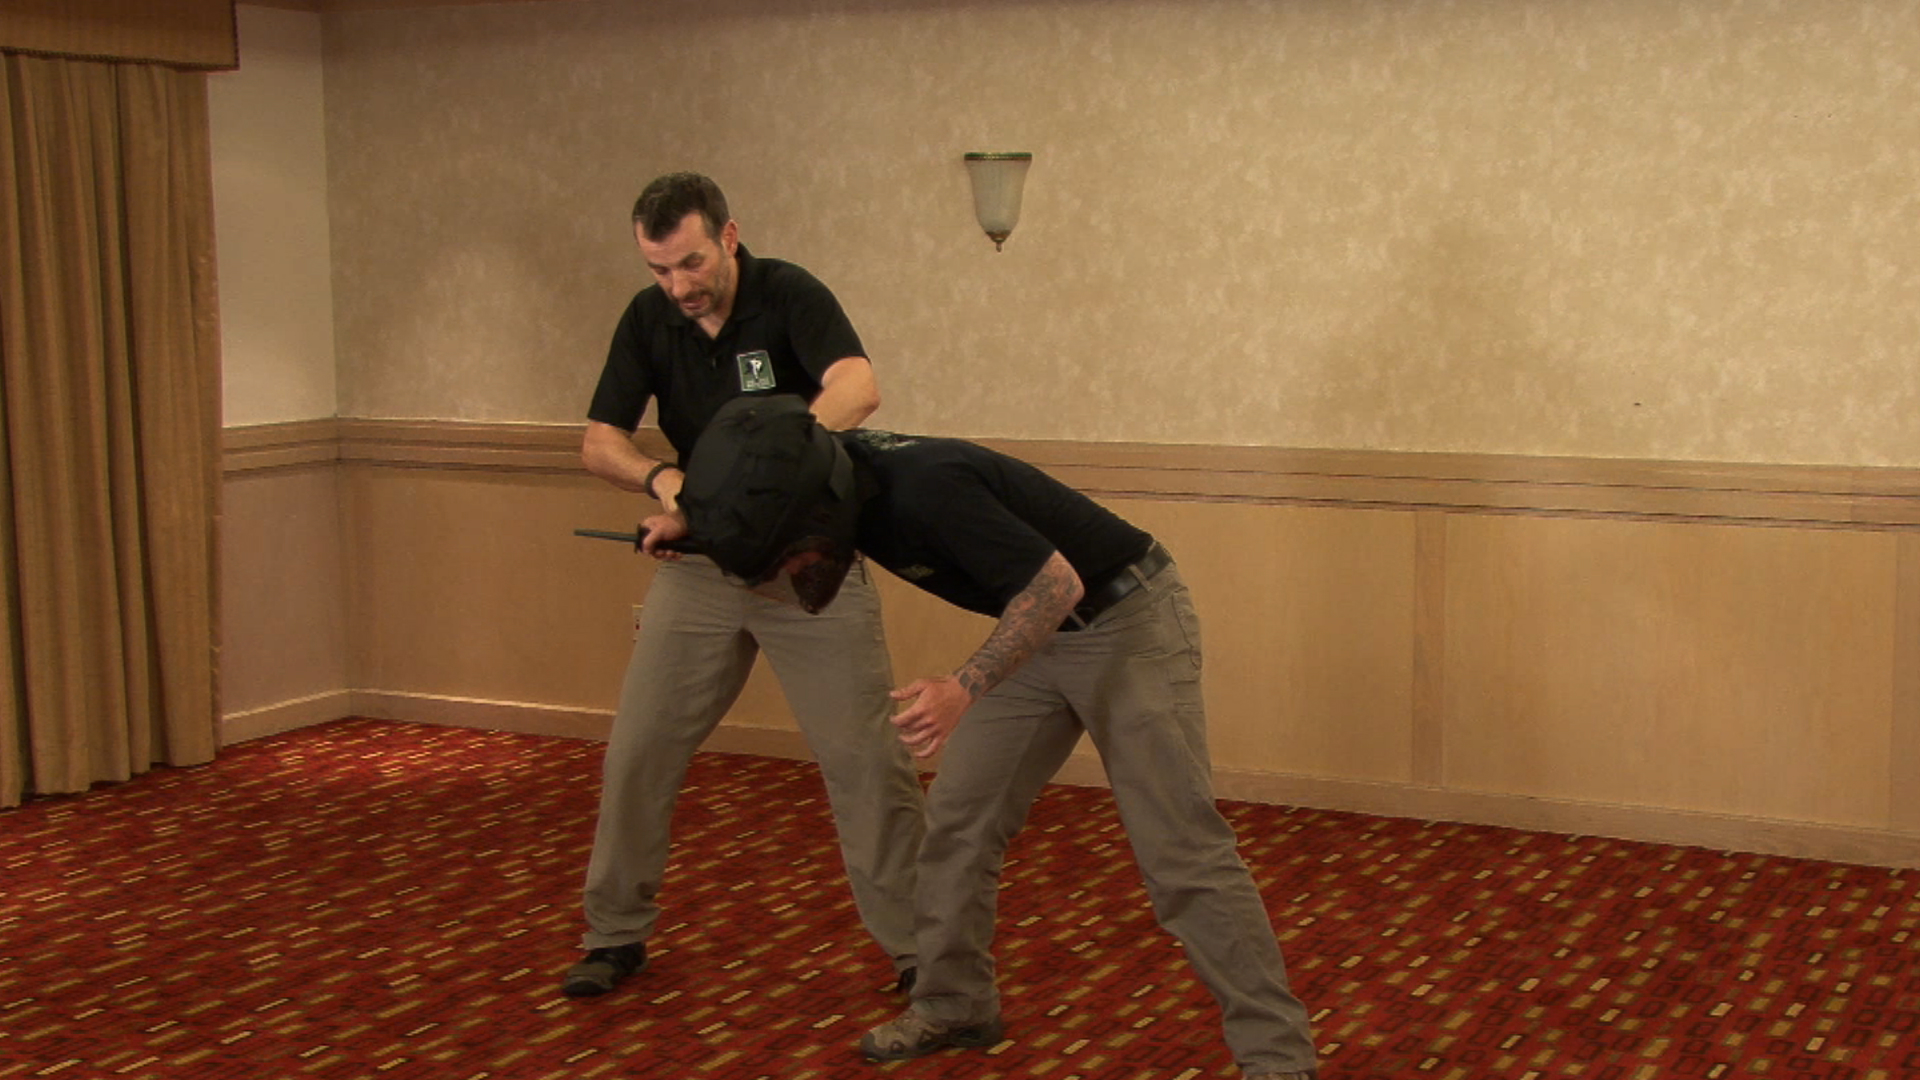 Two men doing a counter knife defense drill